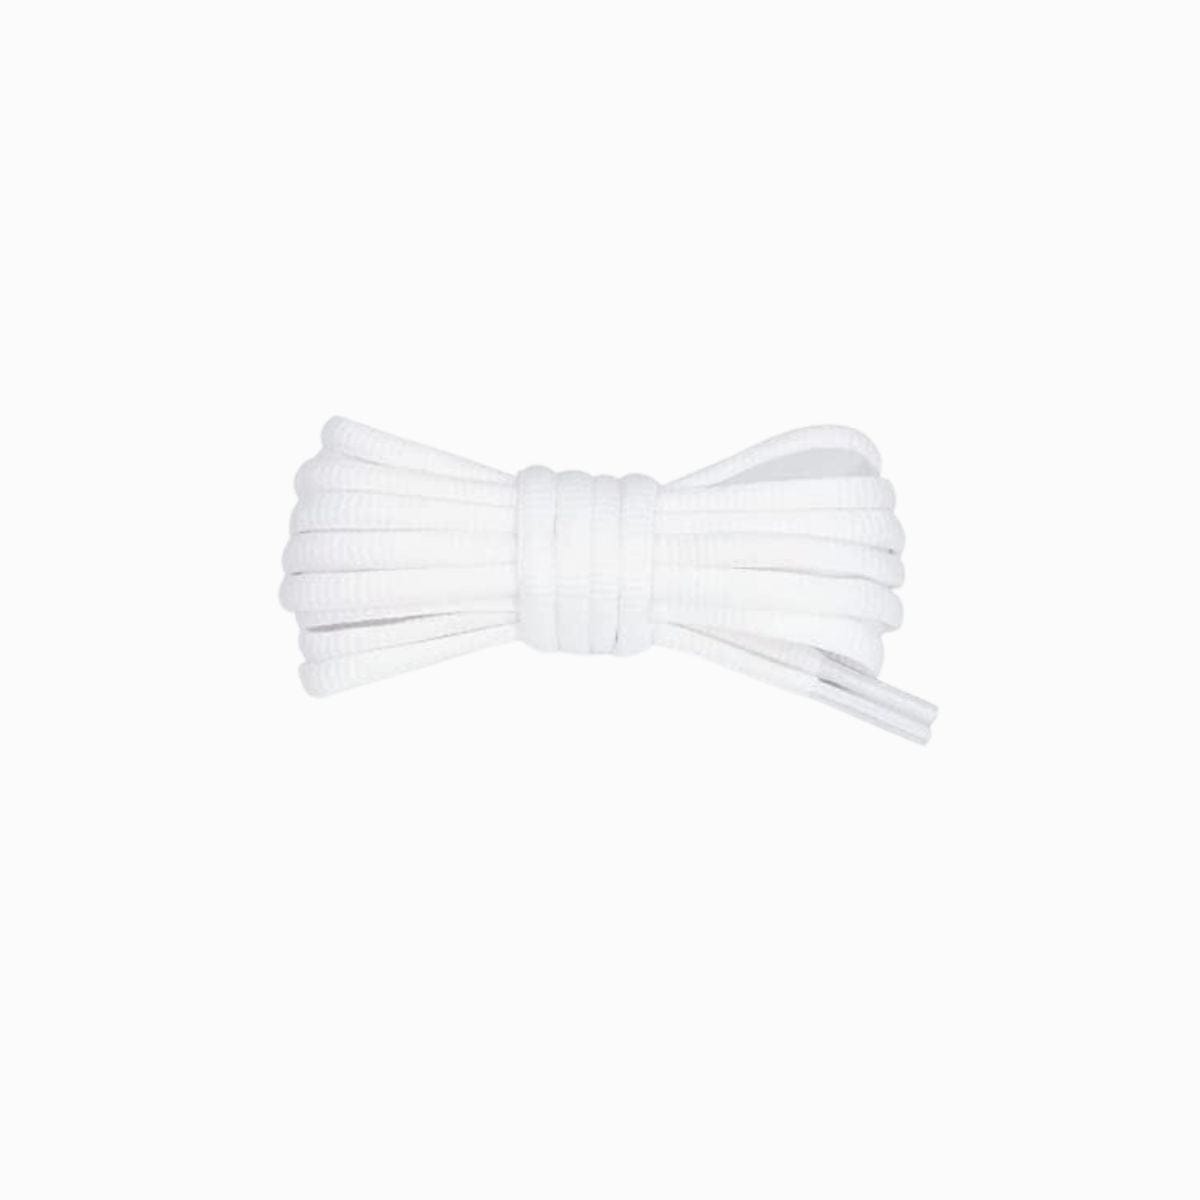 Nike_Vomero_Replacement_Laces_White_Running_Shoelaces